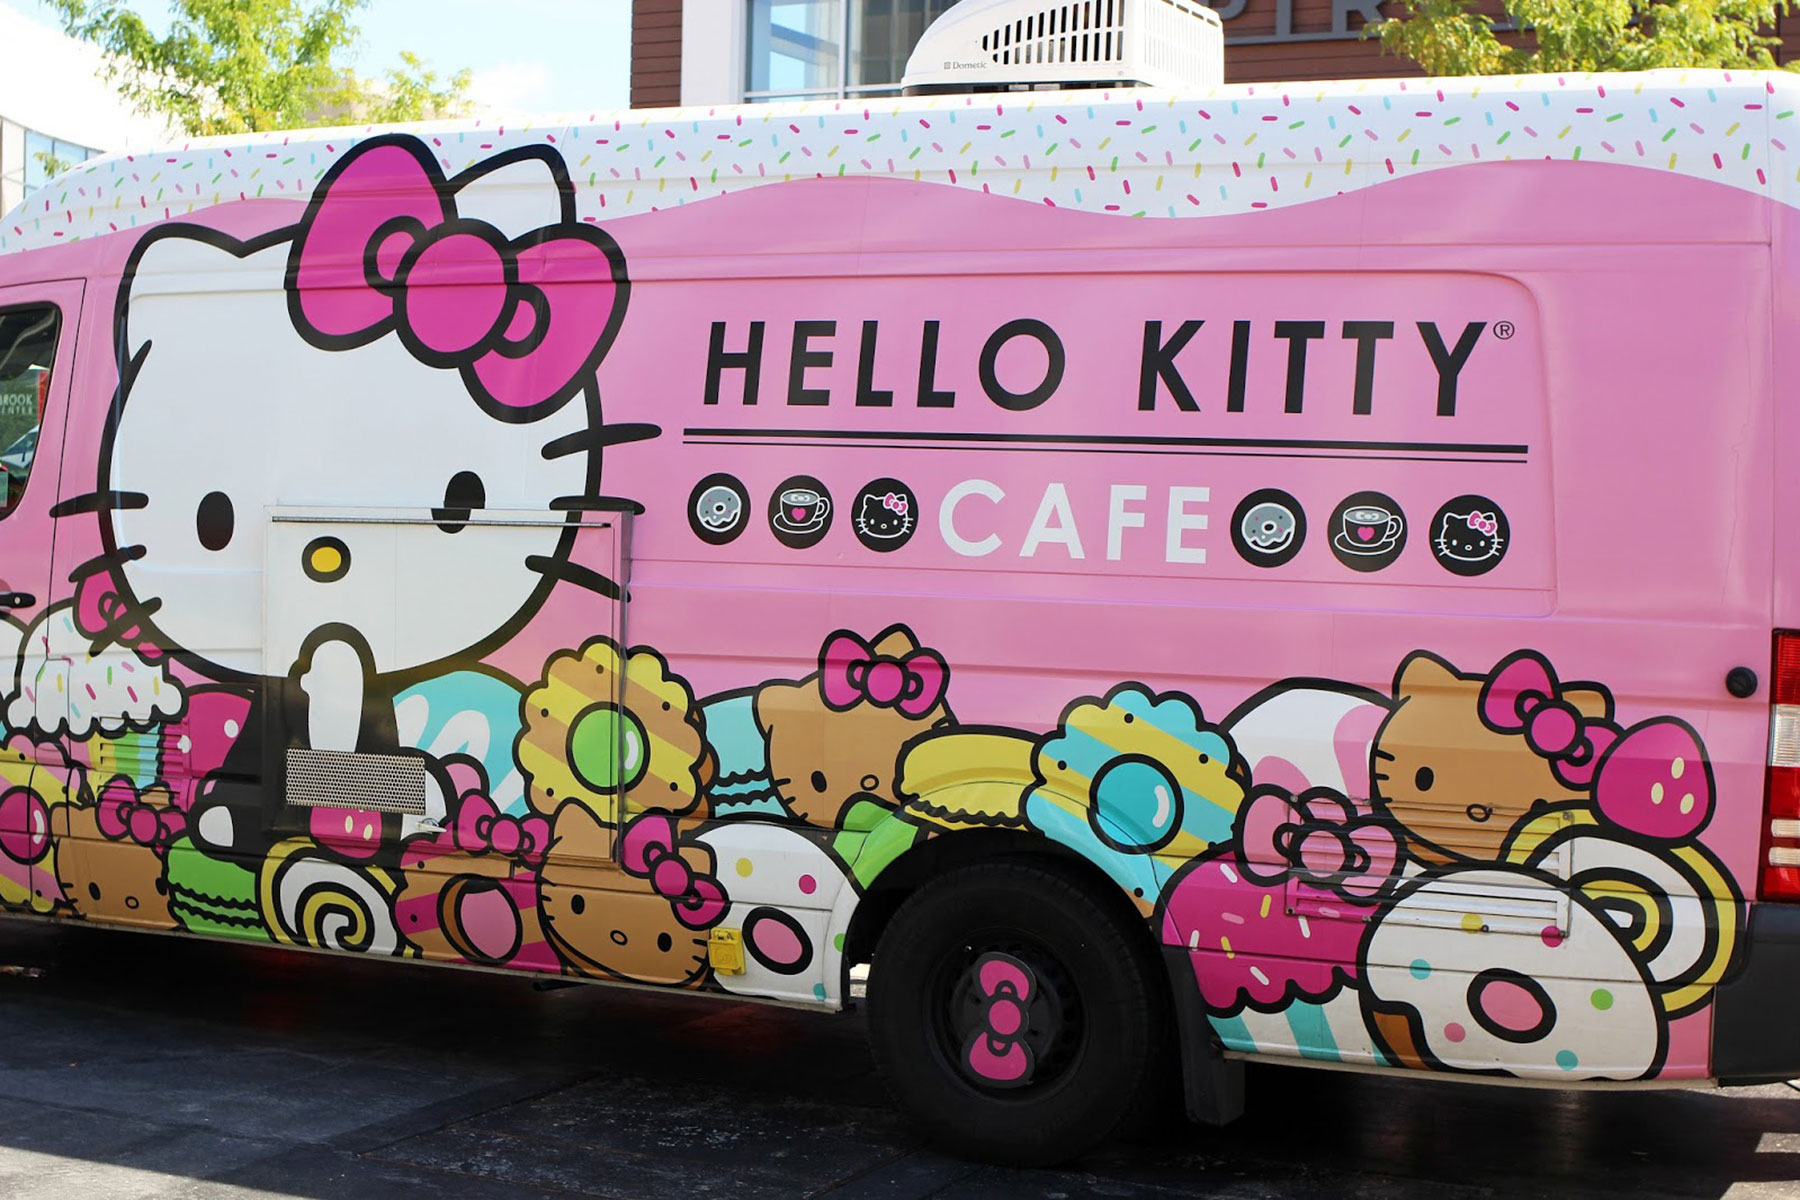 Hello Kitty Cafe Truck to make its first appearance in ...